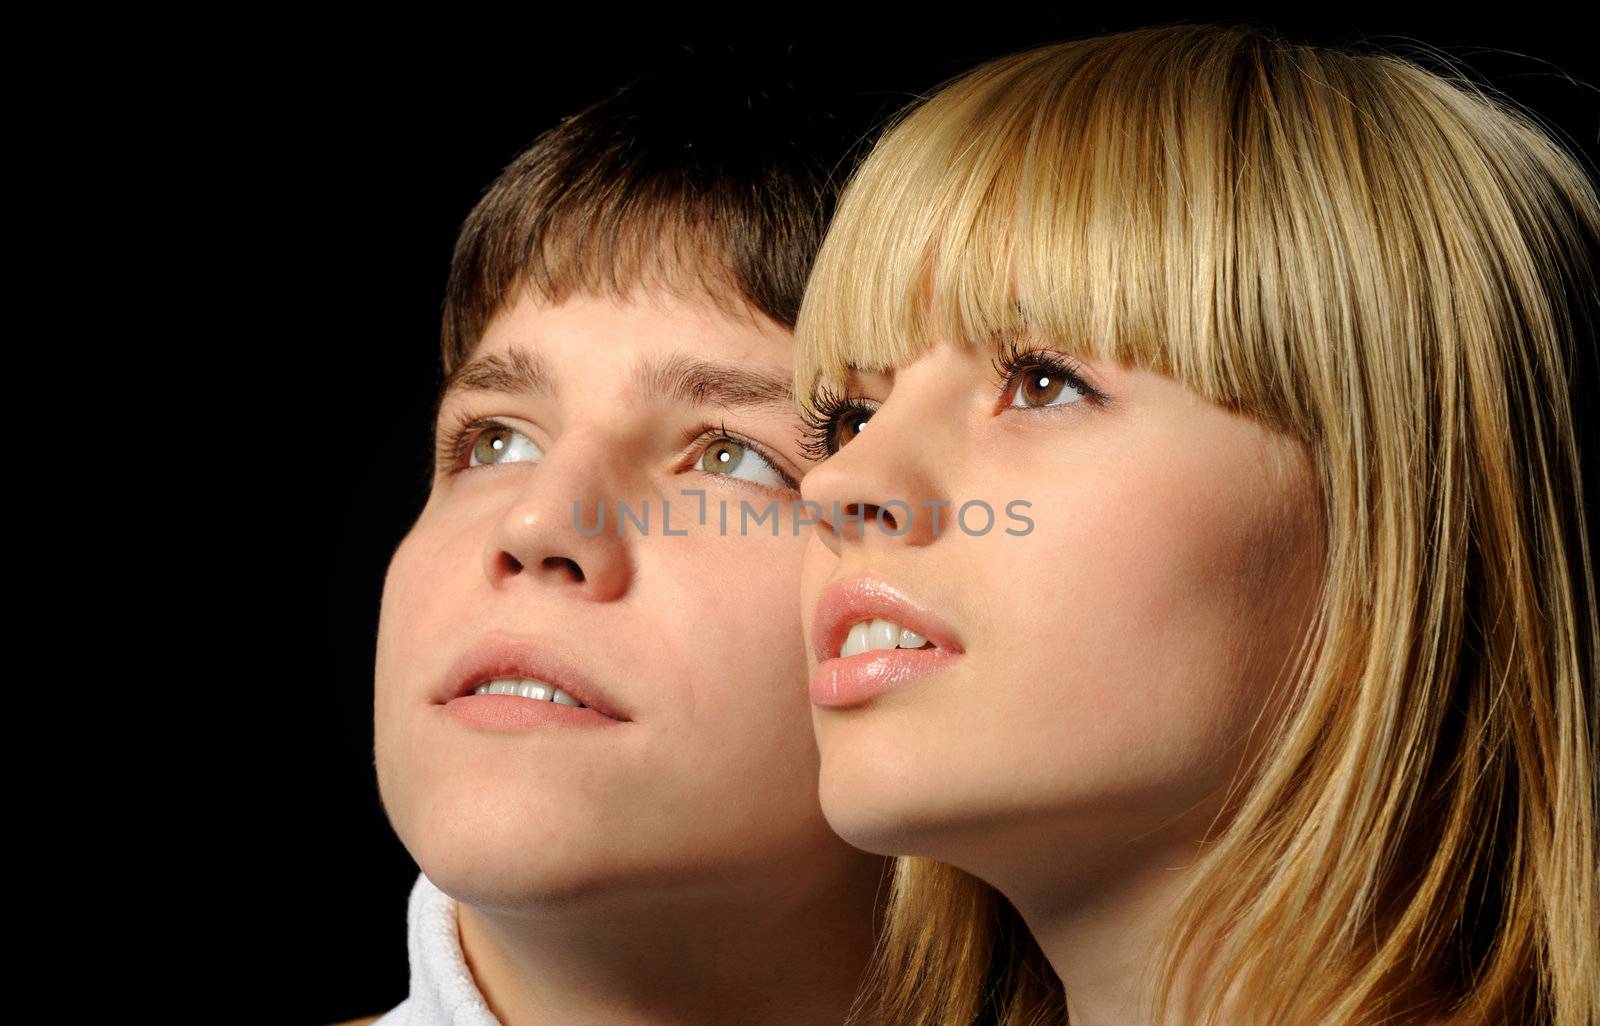 Young enamoured pair. A romantic atmosphere. A dark back